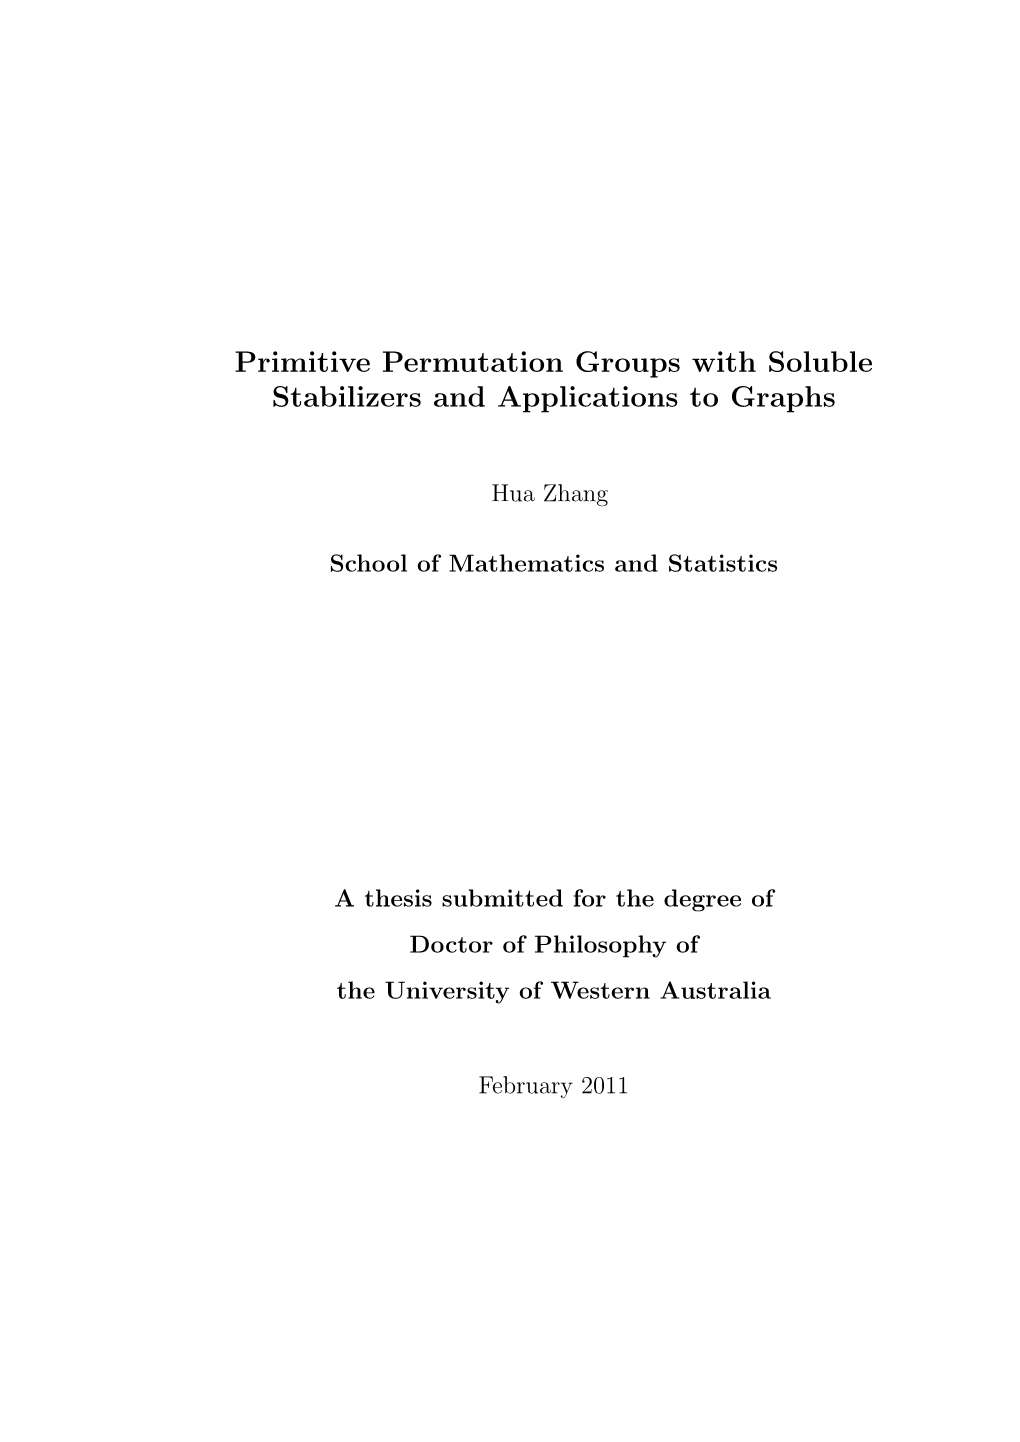 Primitive Permutation Groups with Soluble Stabilizers and Applications to Graphs